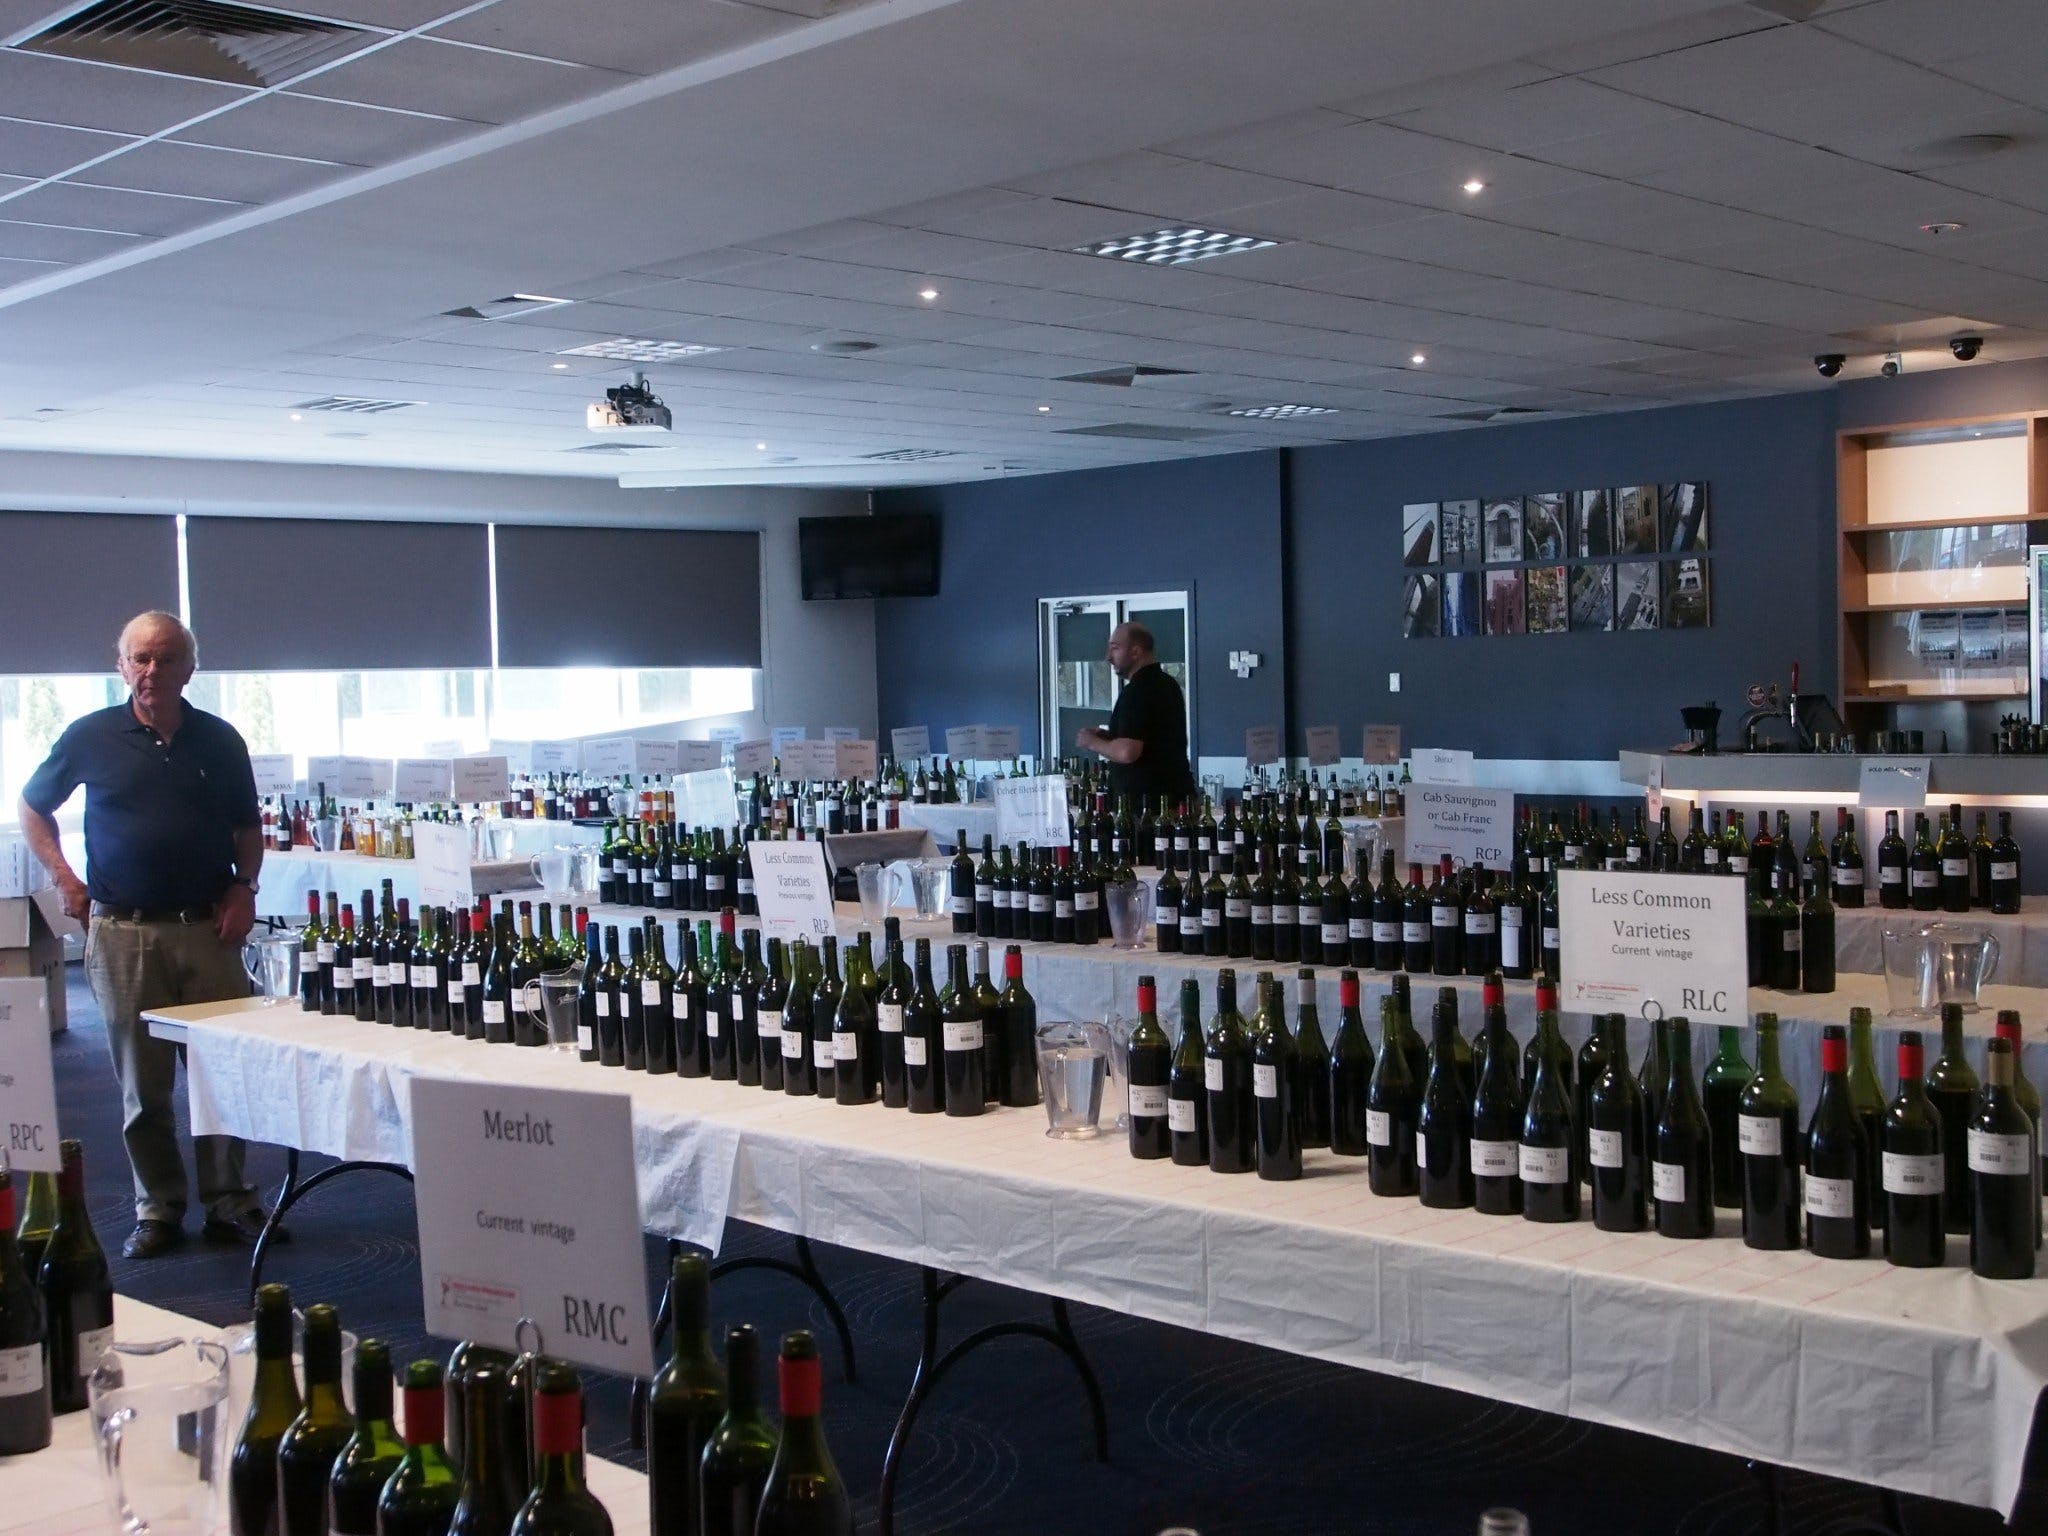 Eltham and District Wine Guild Annual Wine Show - 51st Annual Show - Kingaroy Accommodation